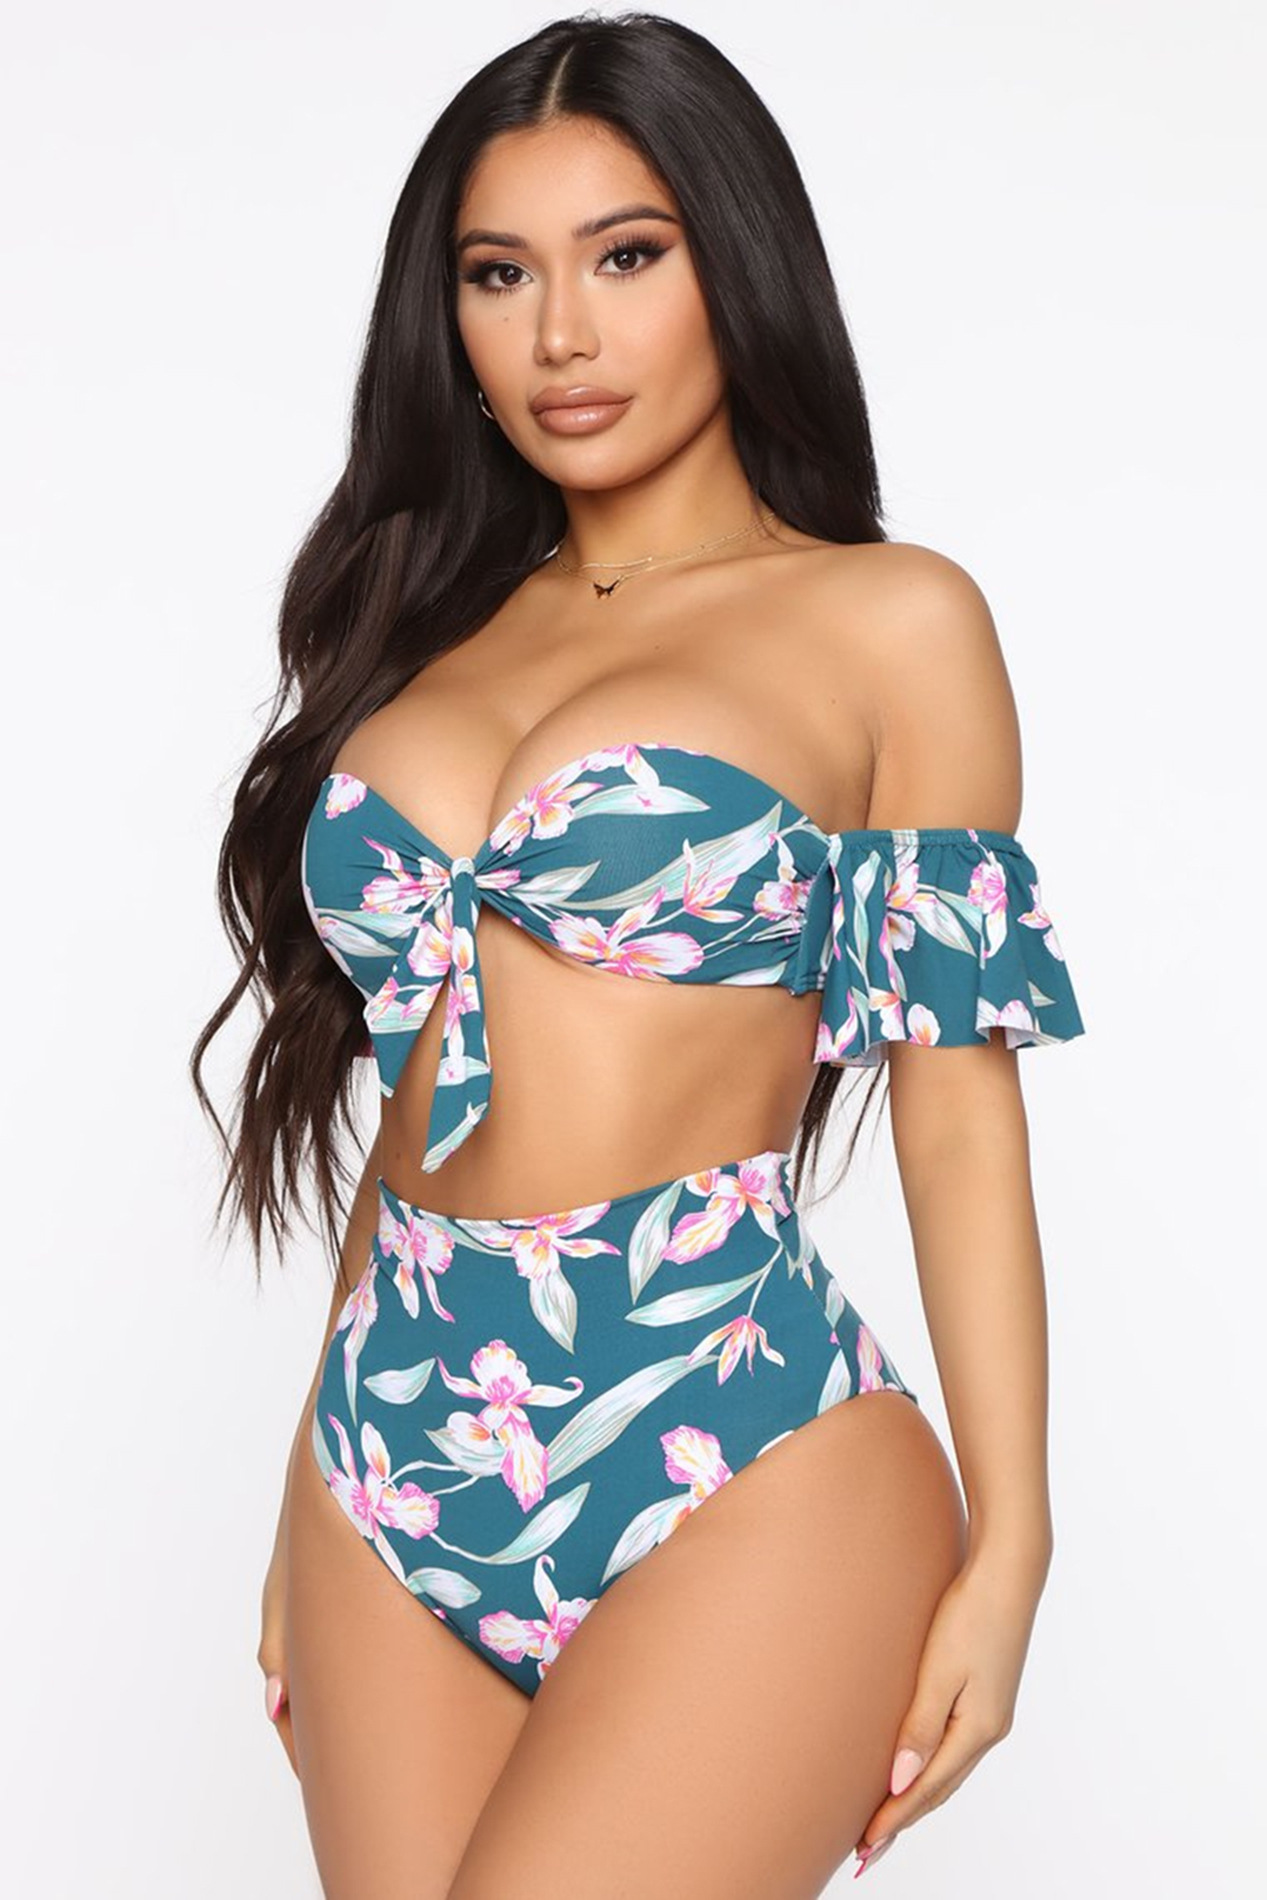 New Style Bikini High Waist Swimsuit European And American Digital Printing Sexy Swimsuit With Sleeves